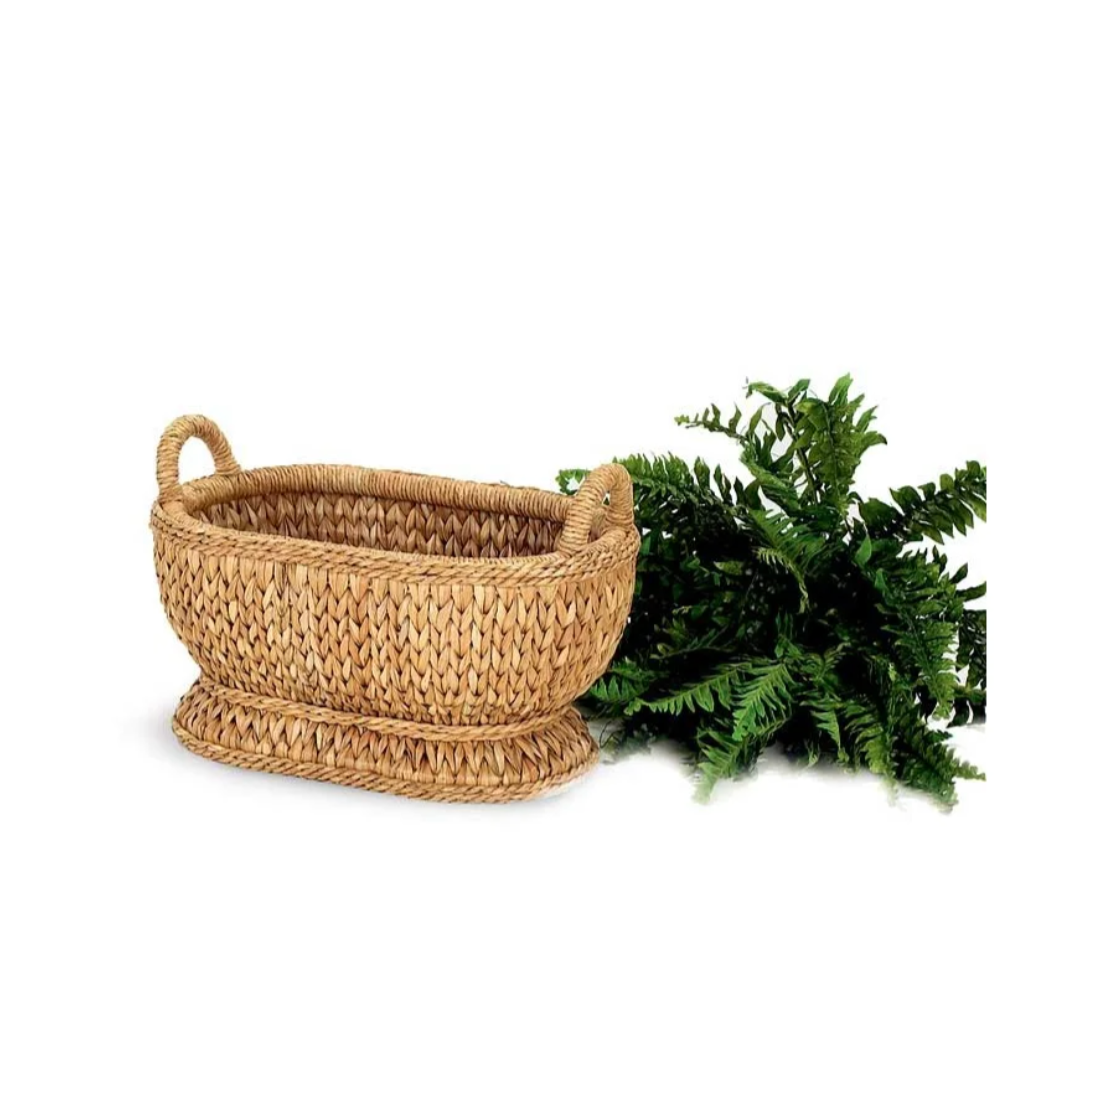 SWEATER WEAVE OVAL COMPOTE BASKET